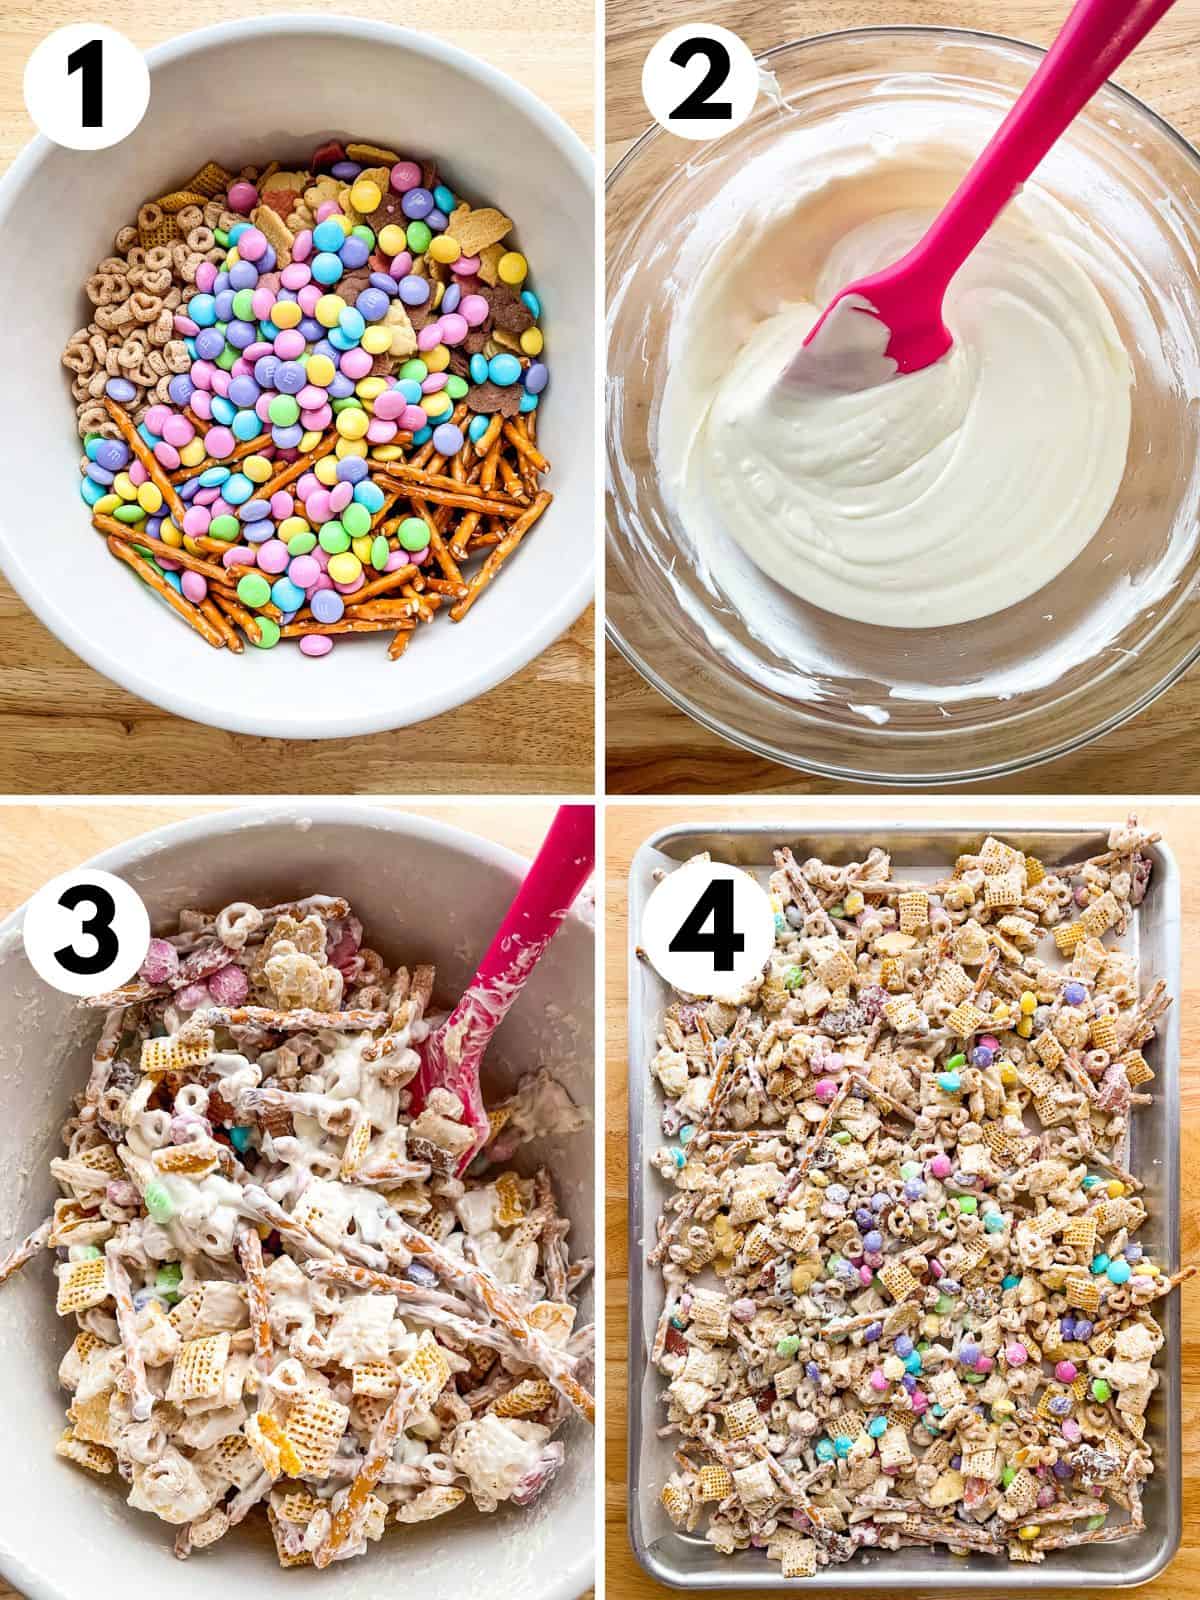 Four steps for making bunny bait. 1. Mixing the cereal, pretzels, candy, and cookies. 2. Melted white chocolate in a bowl. 3. Cereal mixture coated with white chocolate. 4. Bunny bait spread onto a sheet pan.